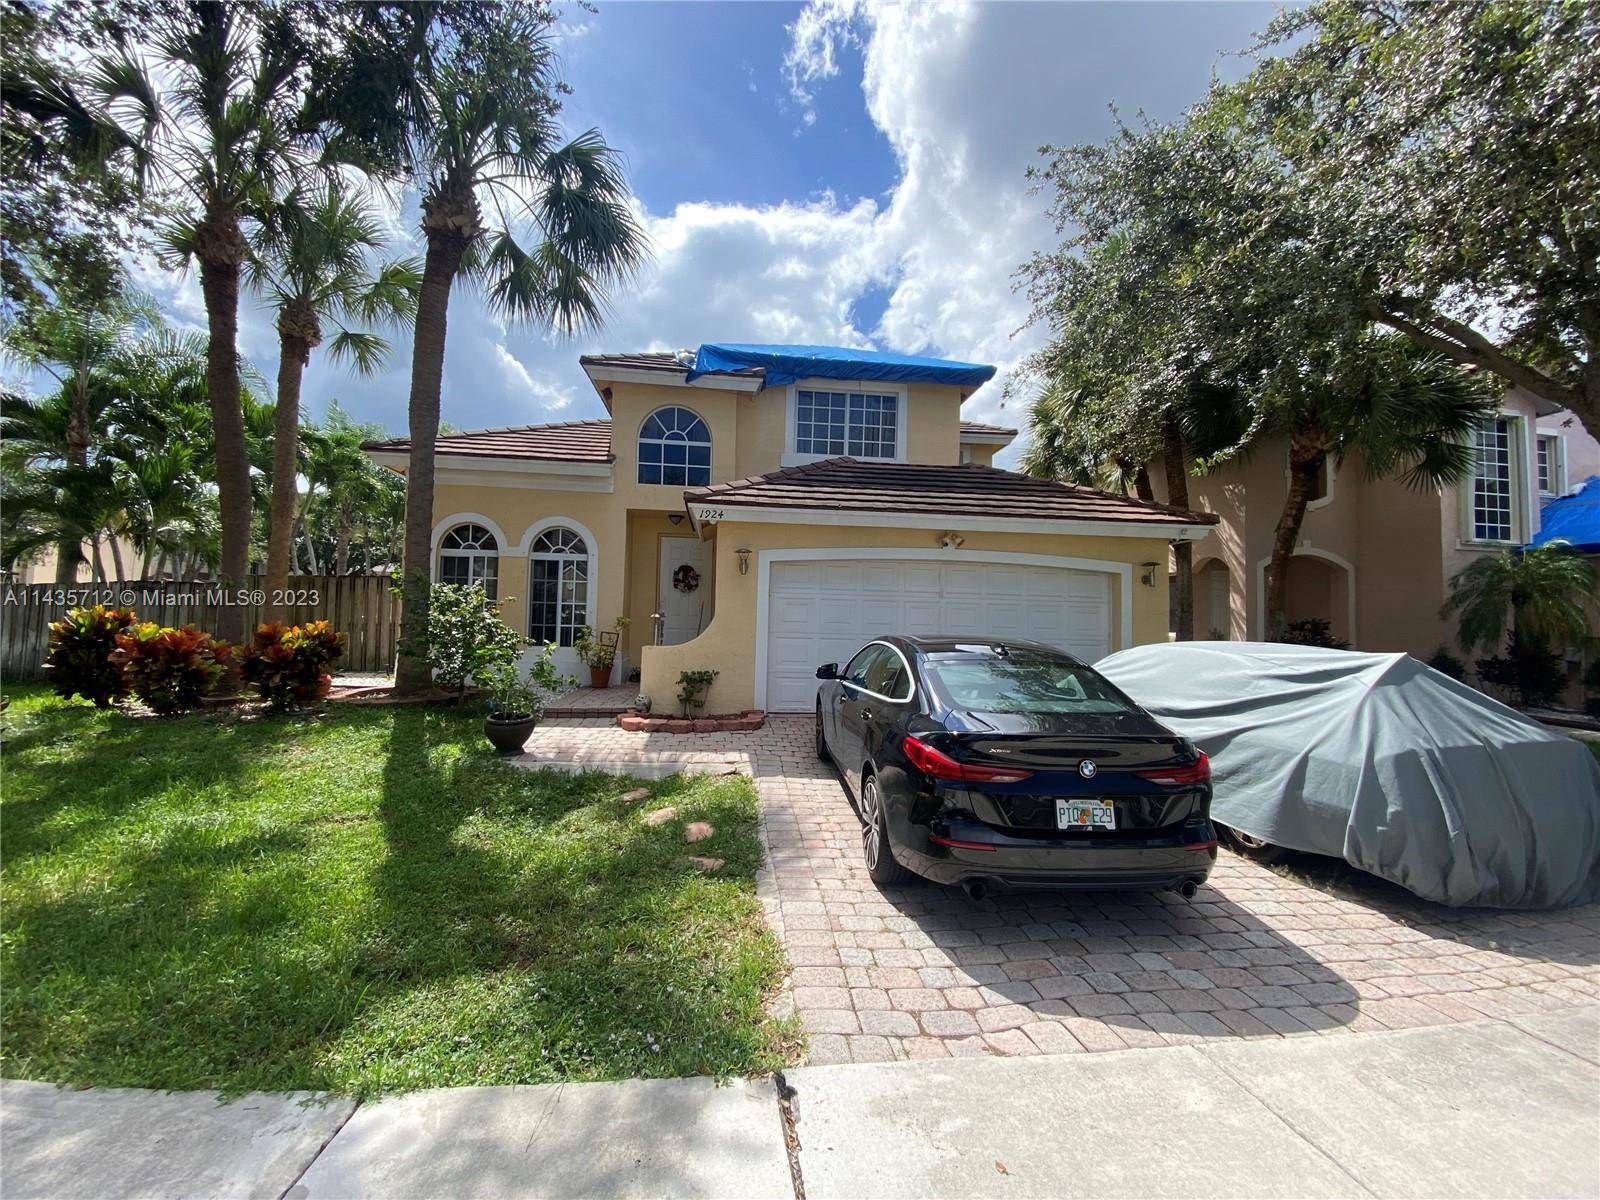 Oversized corner lot, One ownership, single family house in gated community well kept, hard floors throughout the house, master bedroom suite on the first floor, powder room guest bathroom and ...